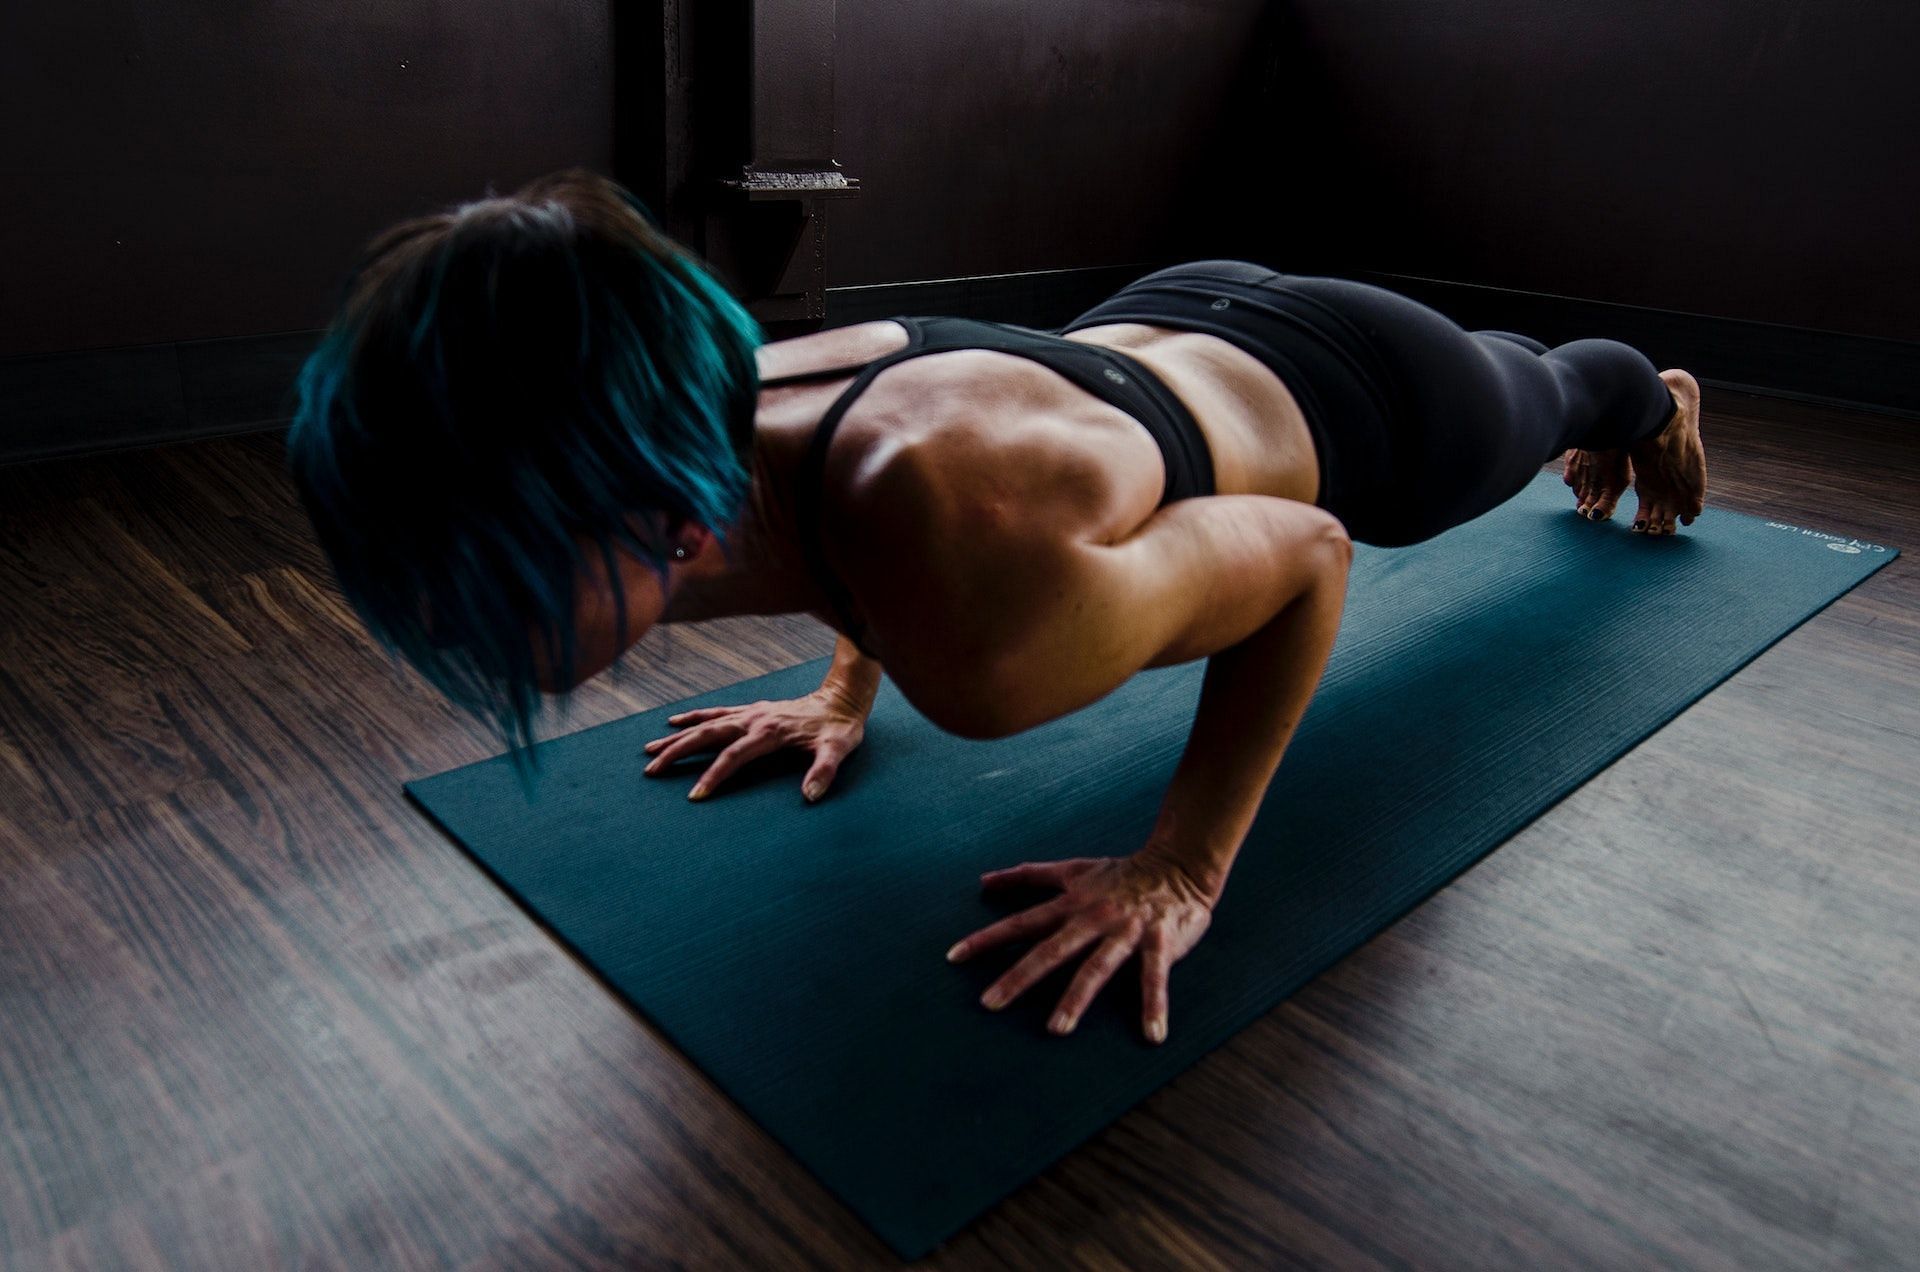 Burpees strengthen the muscles and enhance endurance. (Photo via Pexels/Karl Solano)